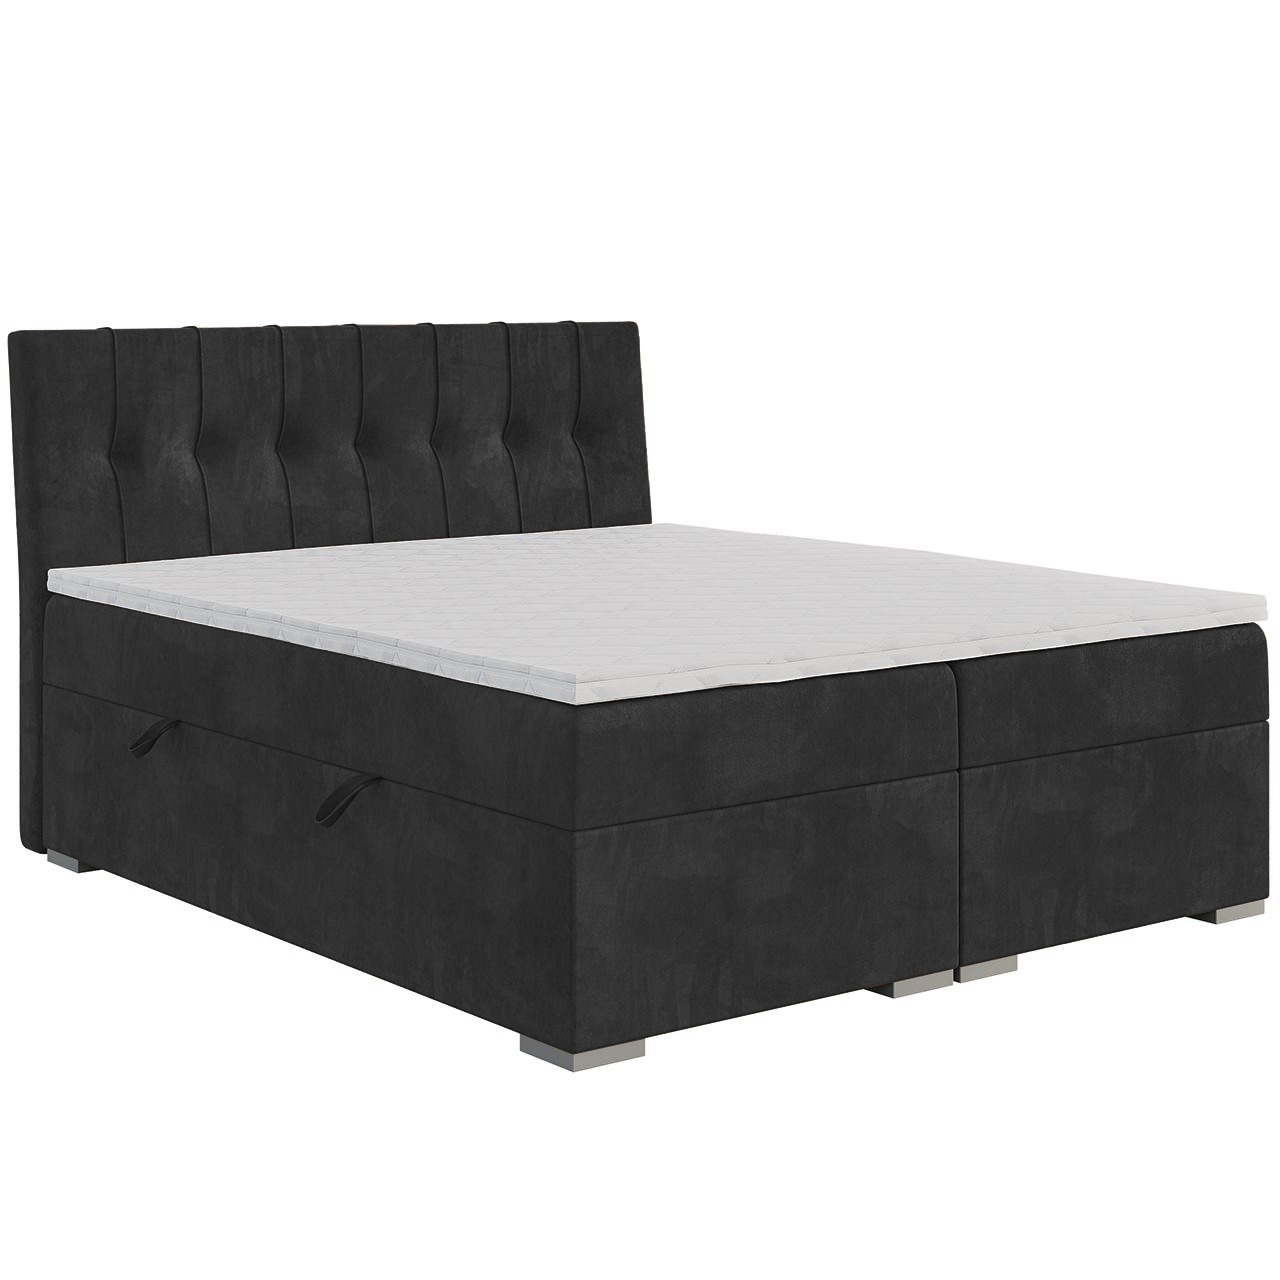 Upholstered bed DANO 140x200 riviera 97